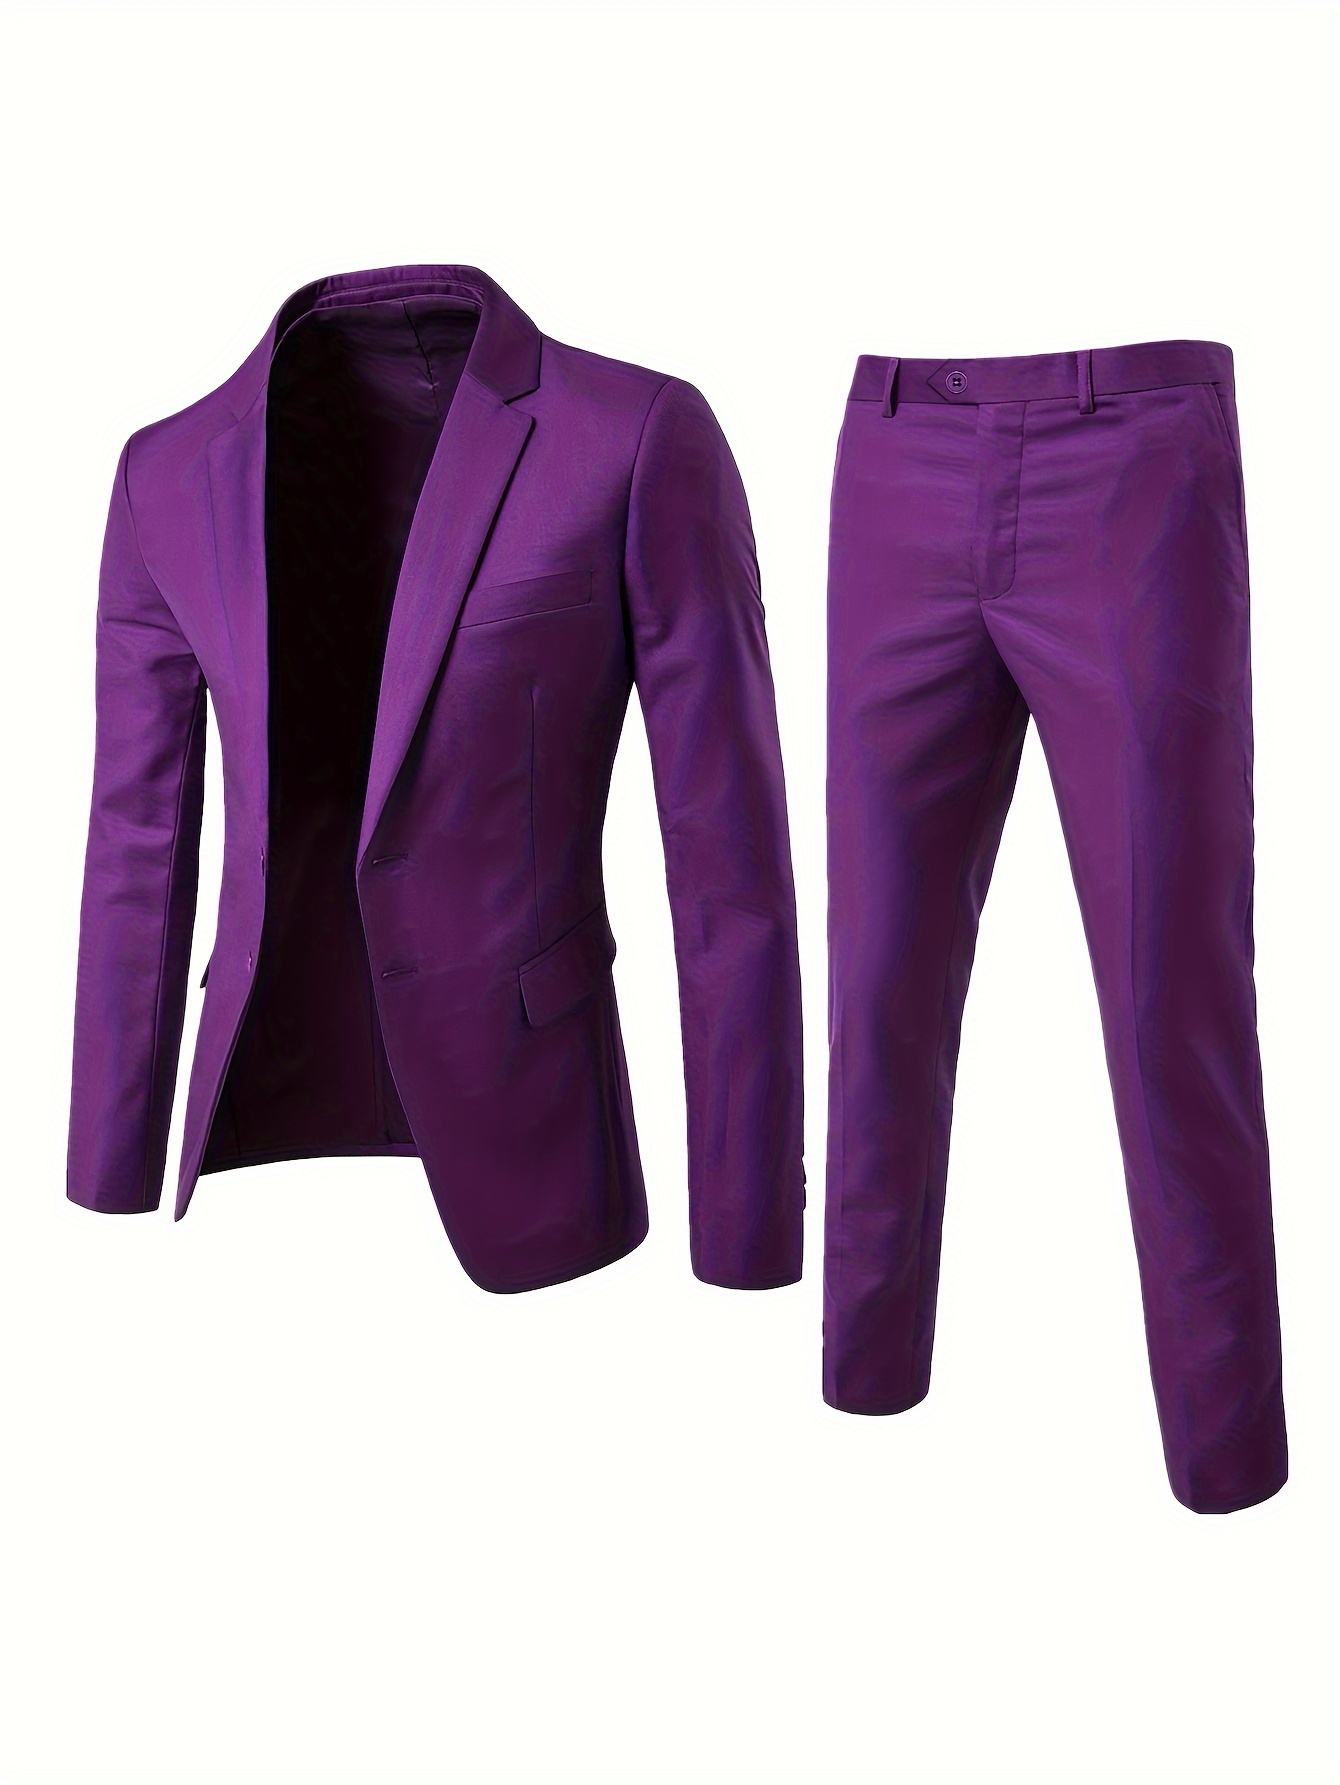 Formal Women Business Suits 3 Piece Waistcoat, Pant and Jacket Sets Purple  Trench Coat Long Blazer Ladies Work Wear Clothes